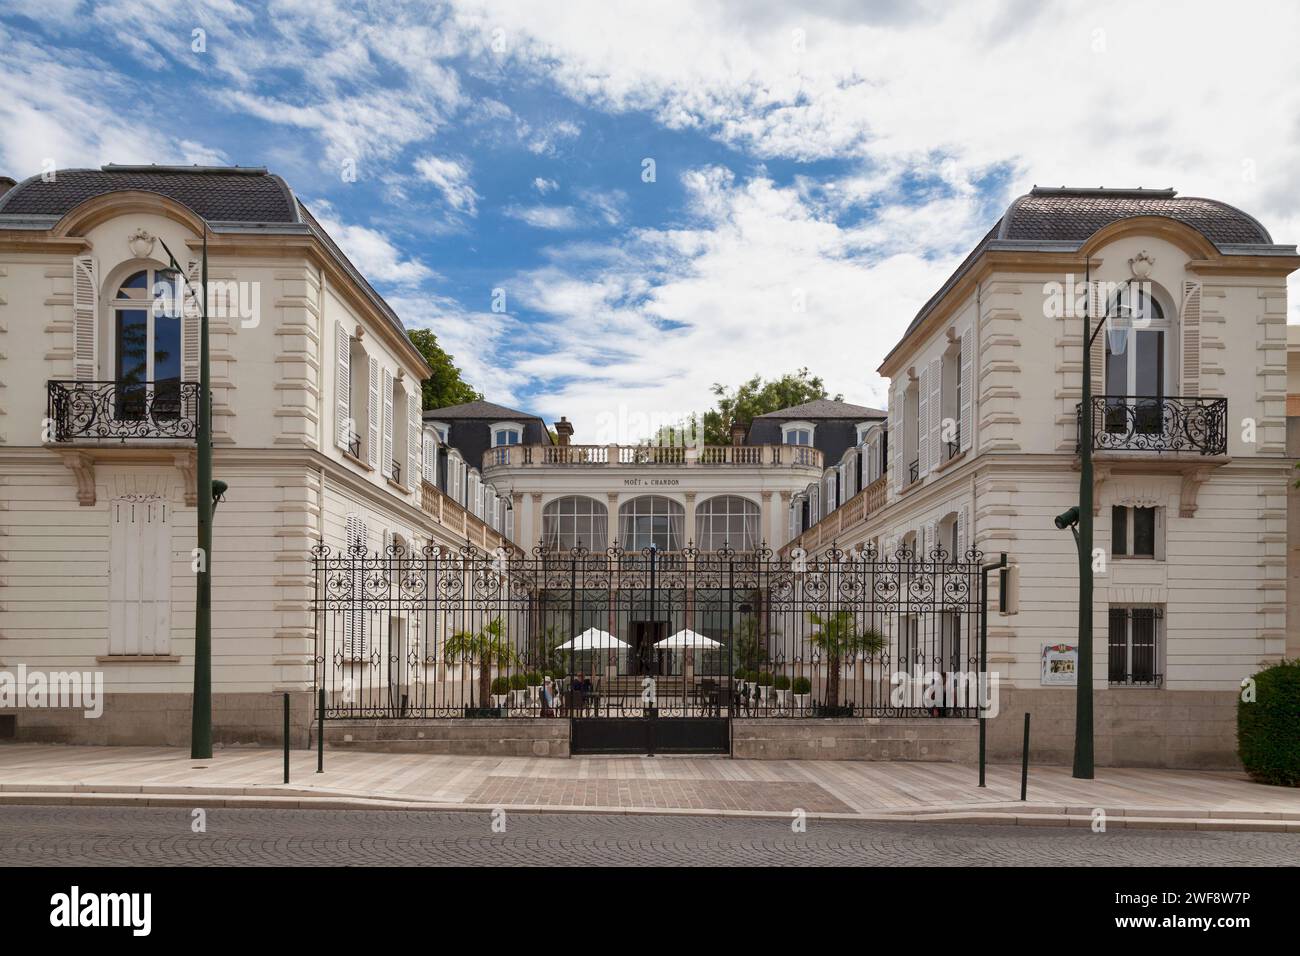 Epernay, France - July 23 2020: The Champagne house Moët et Chandon located on Avenue de Champagne, next to the town hall. Stock Photo